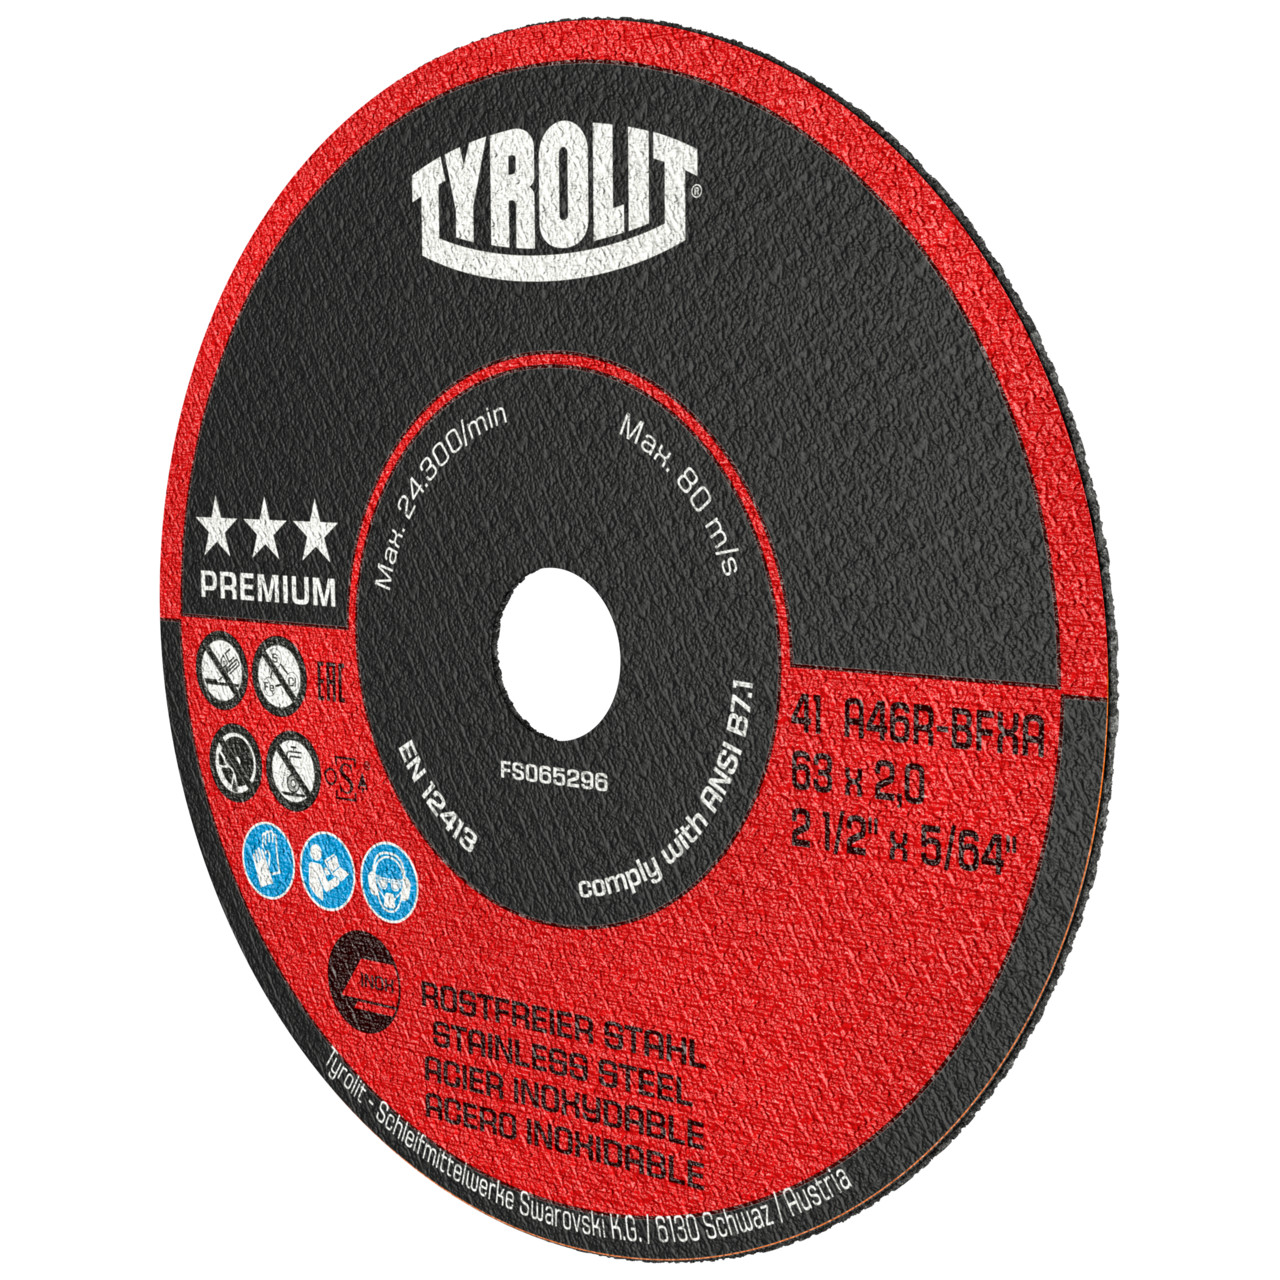 Tyrolit Cutting discs DxDxH 75x1x10 For stainless steel, shape: 41 - straight version, Art. 299270